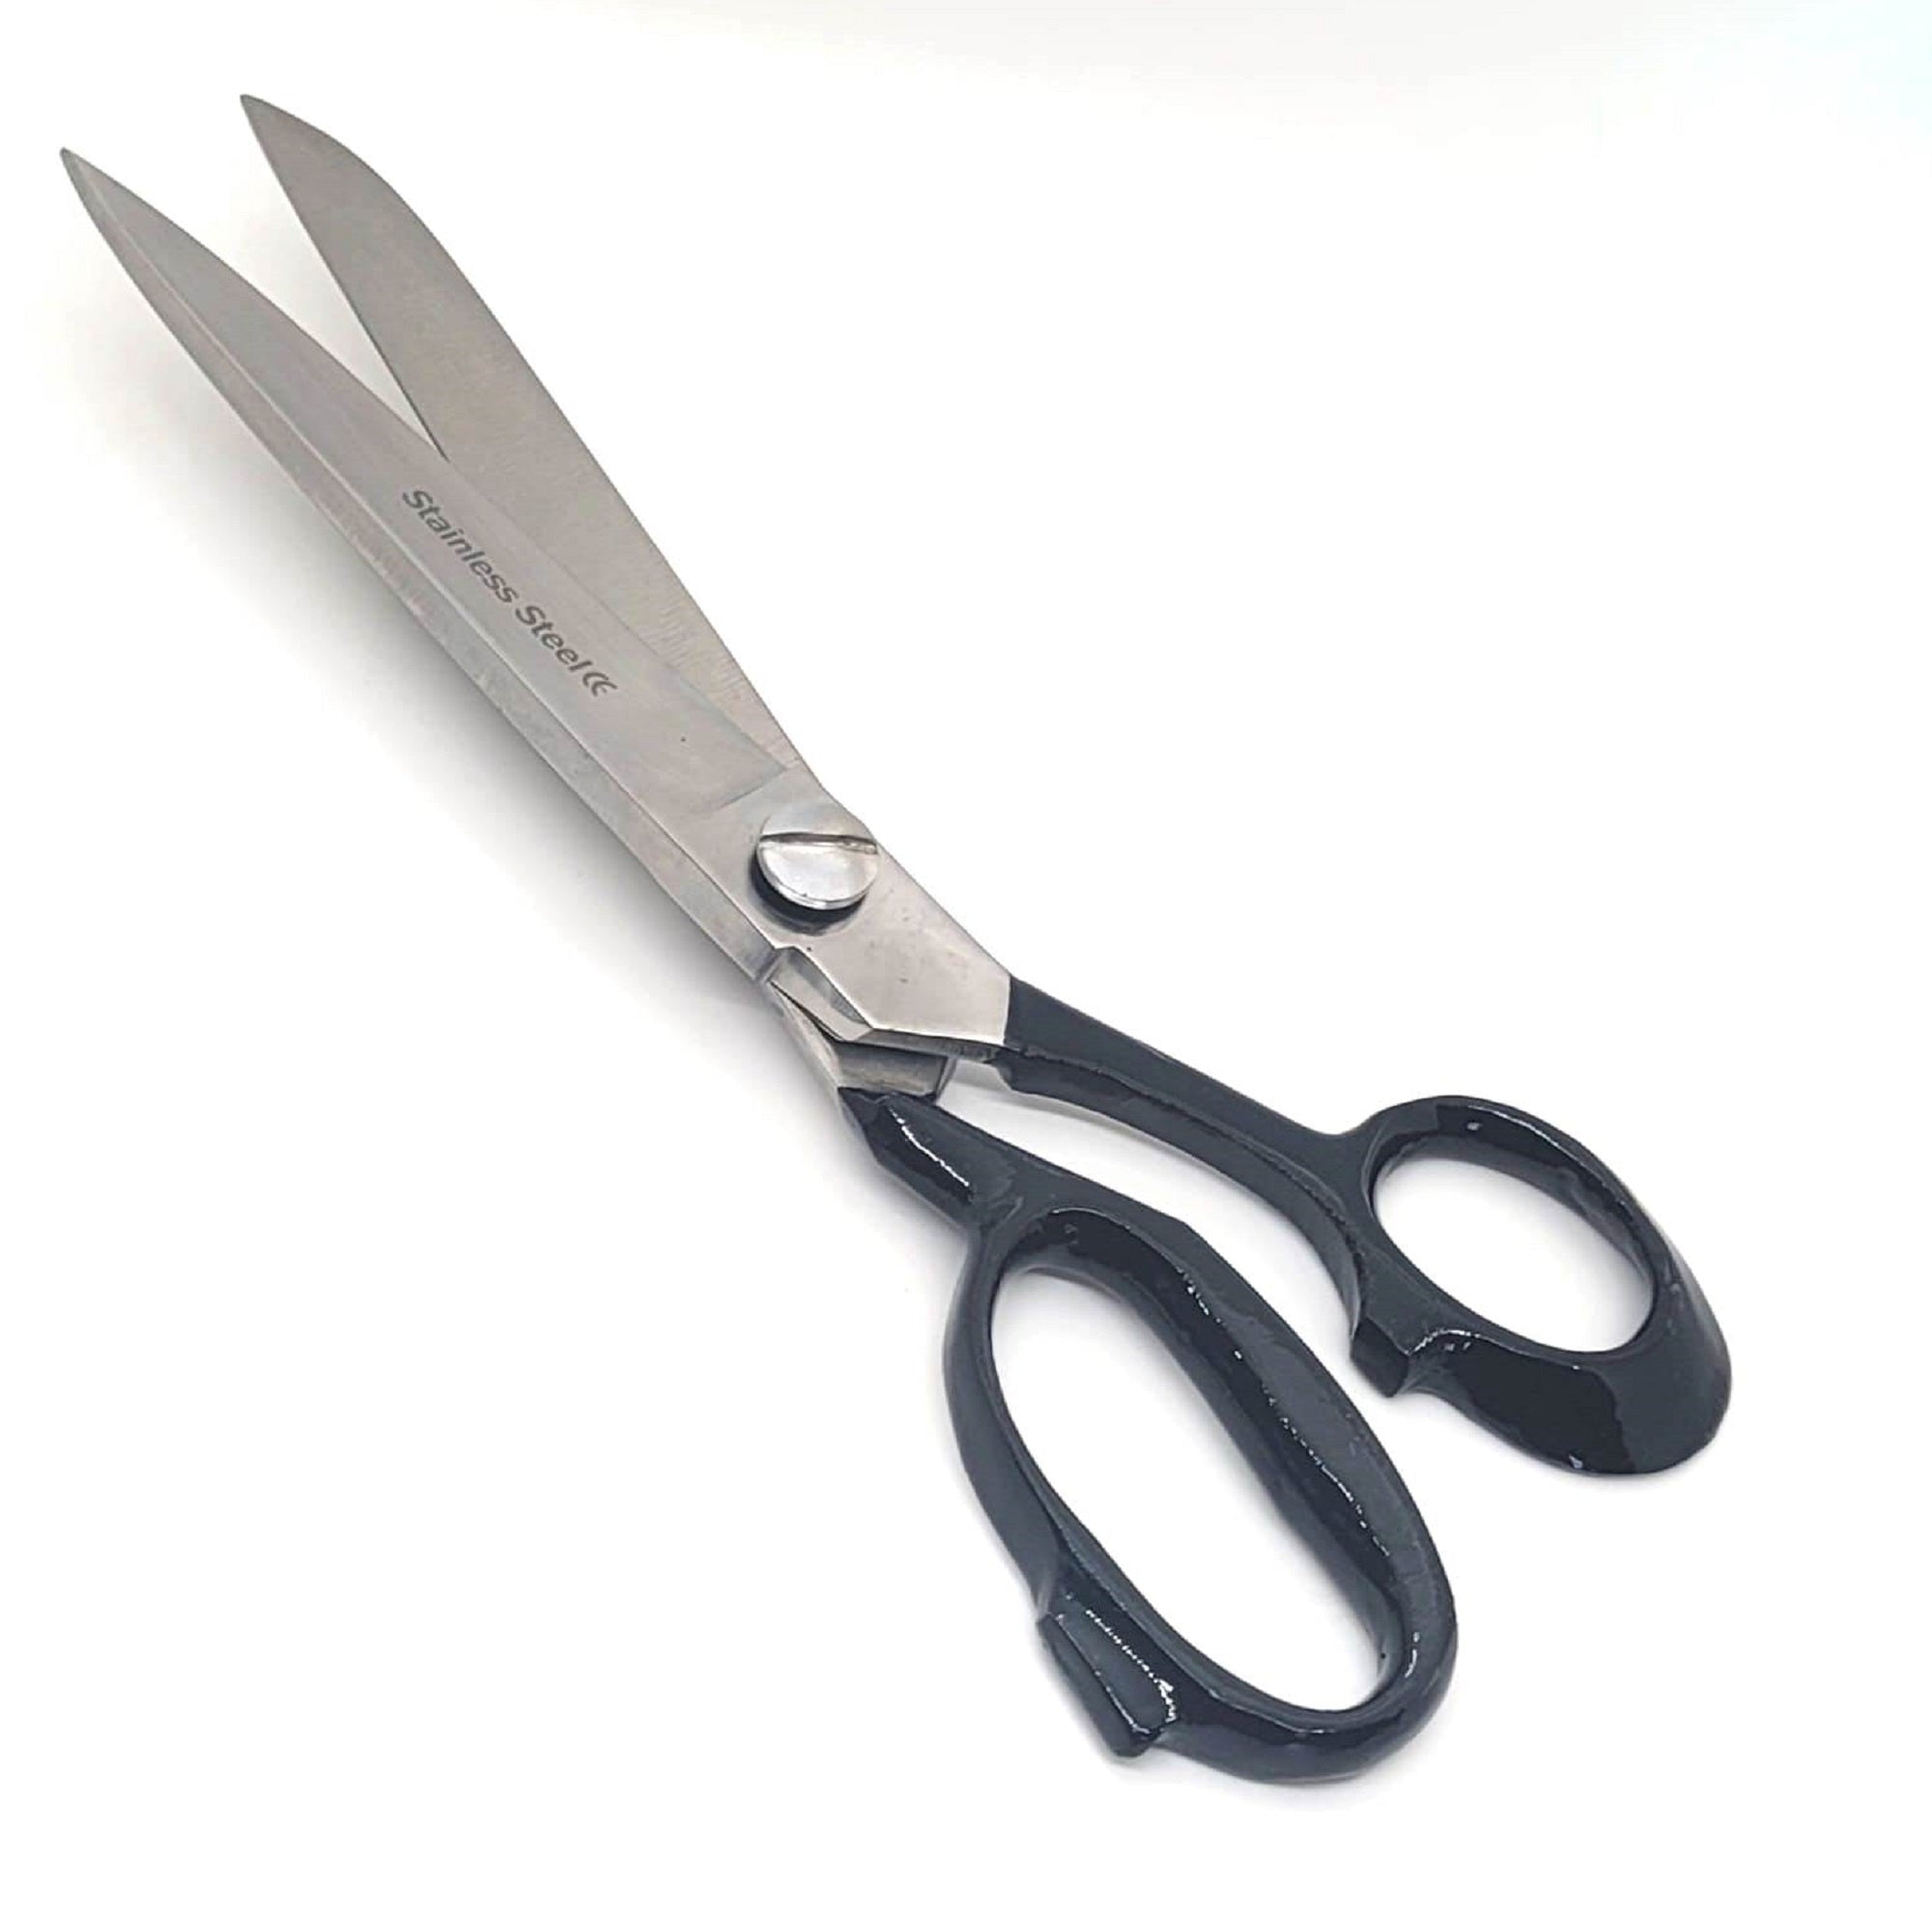 8 inch Long Heavy Duty Stainless Steel Tailor Scissors for Sewing Needs Black Handle